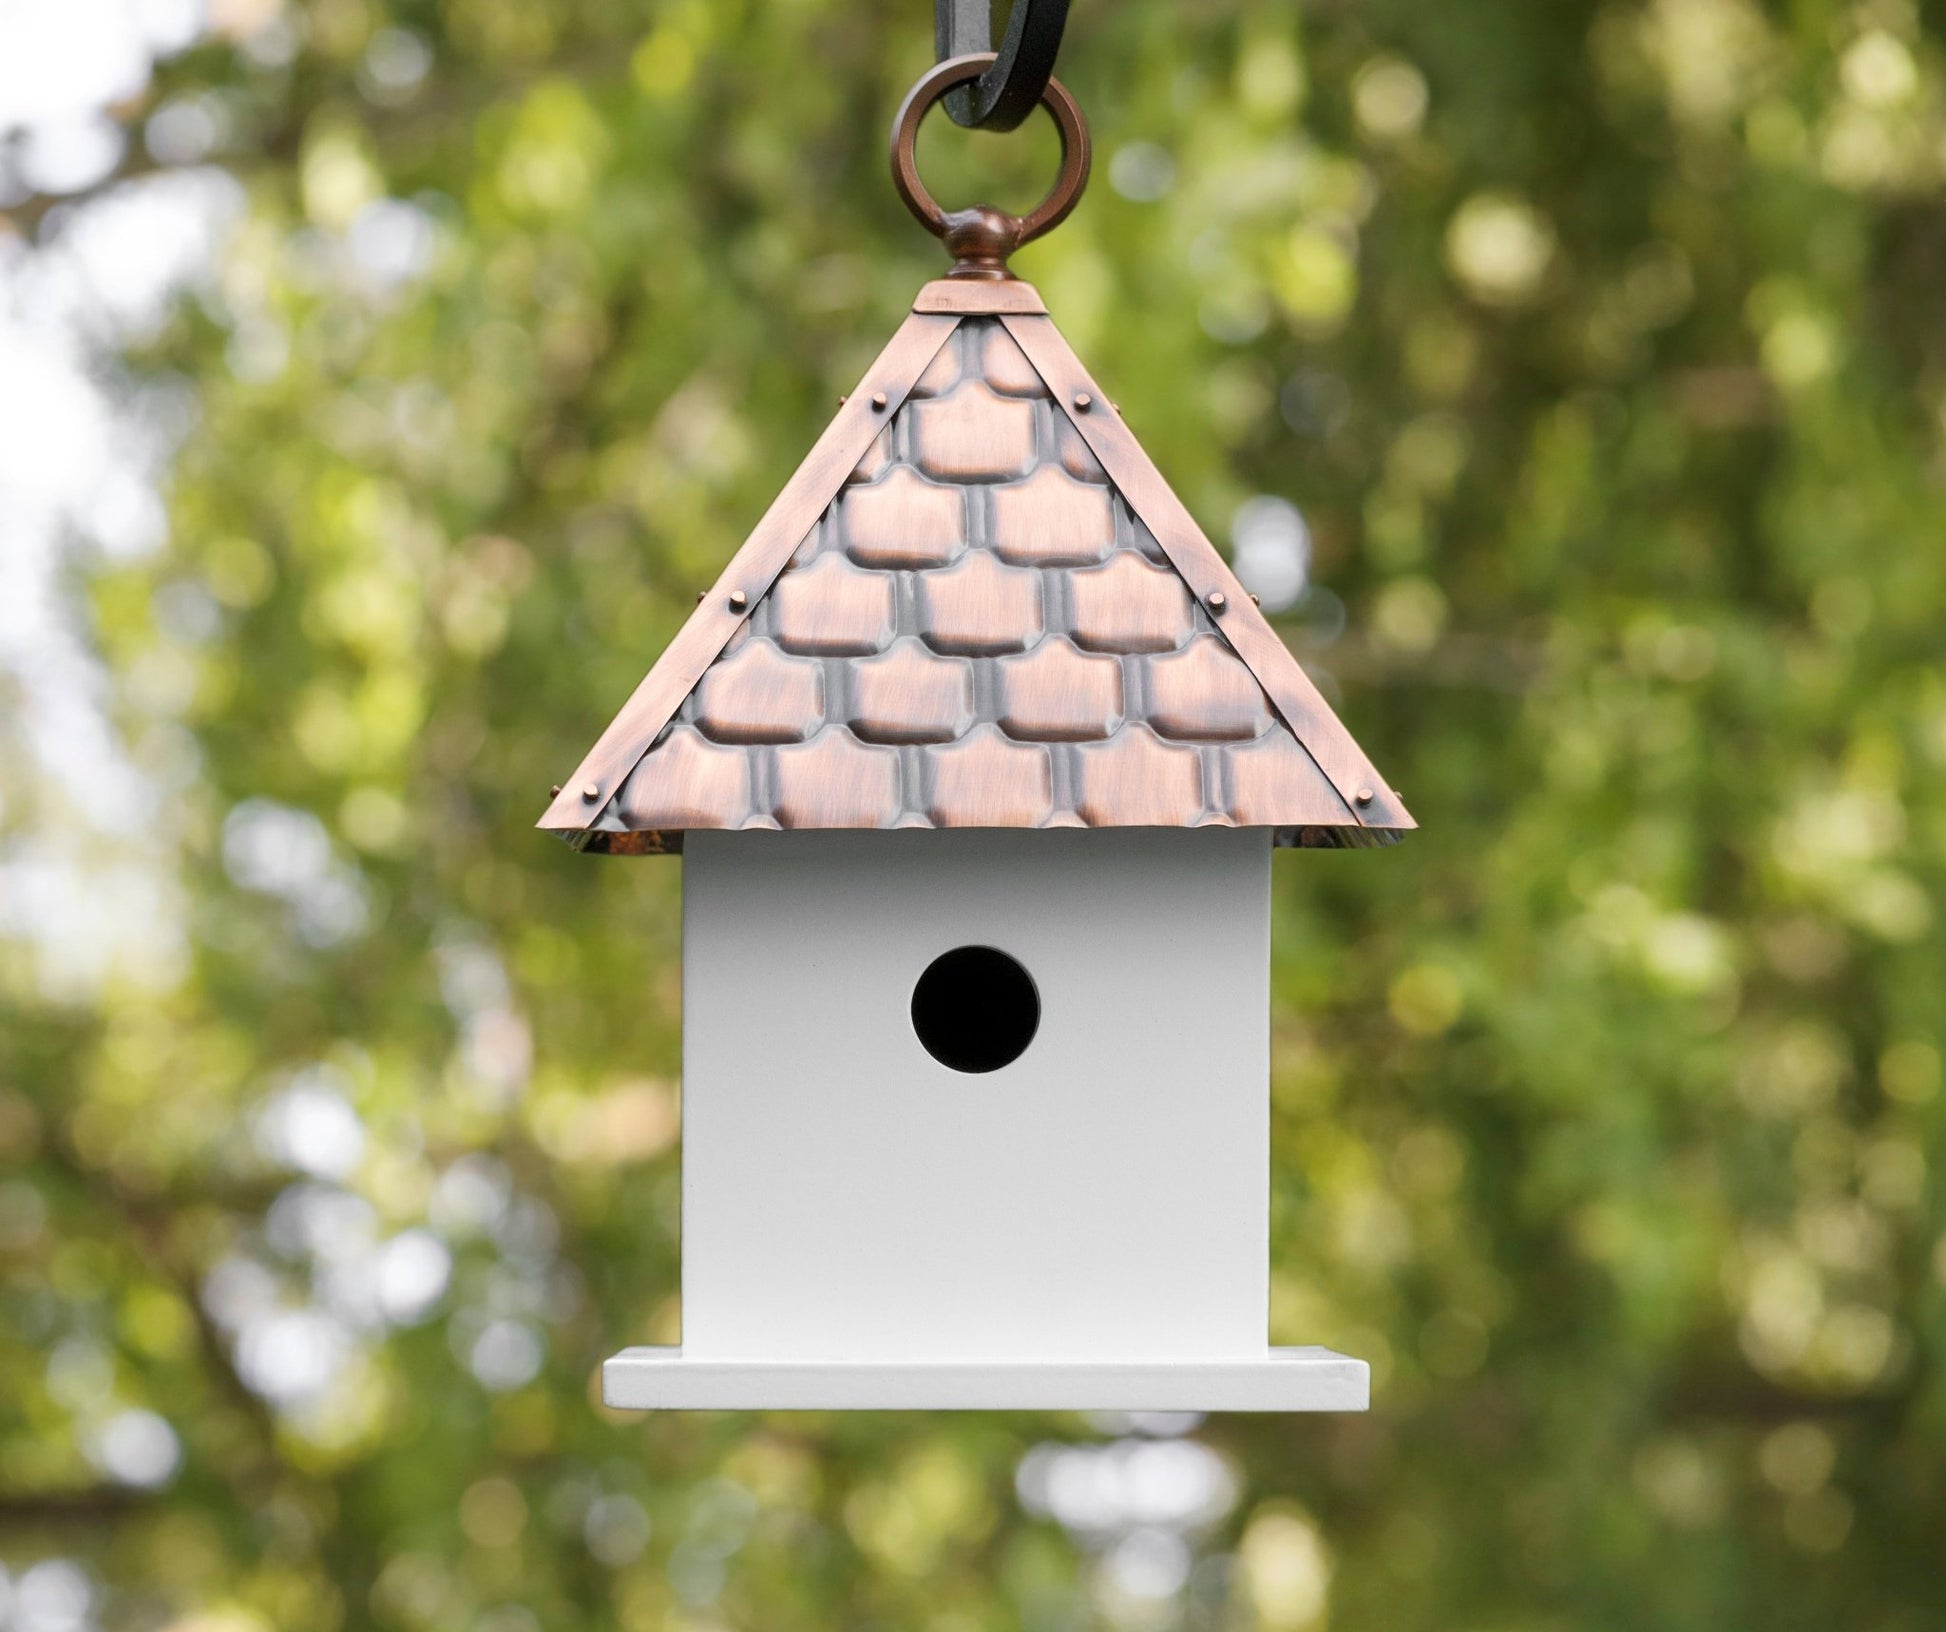 Bird House Bungalow – Shingled Antique Copper Roof - Good Directions